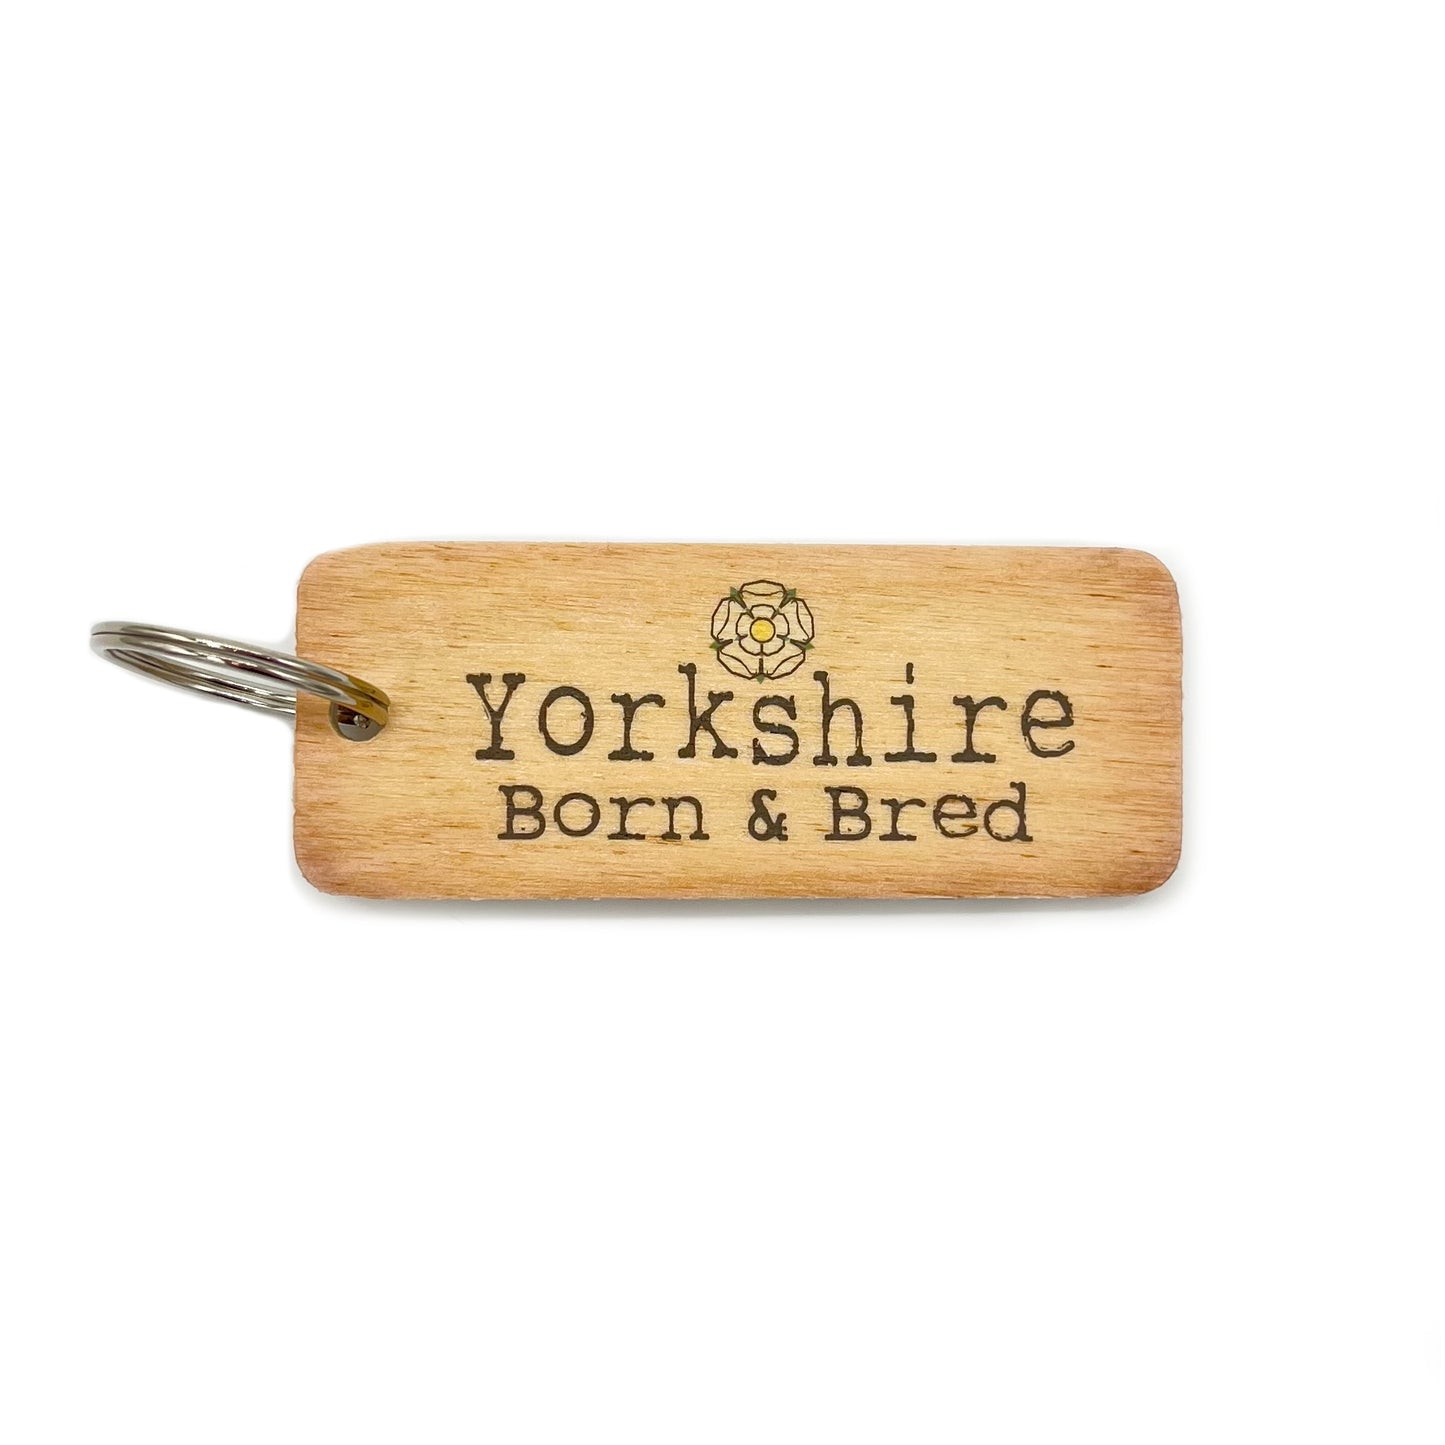 Yorkshire Born & Bred Rustic Wooden Keyring - The Great Yorkshire Shop